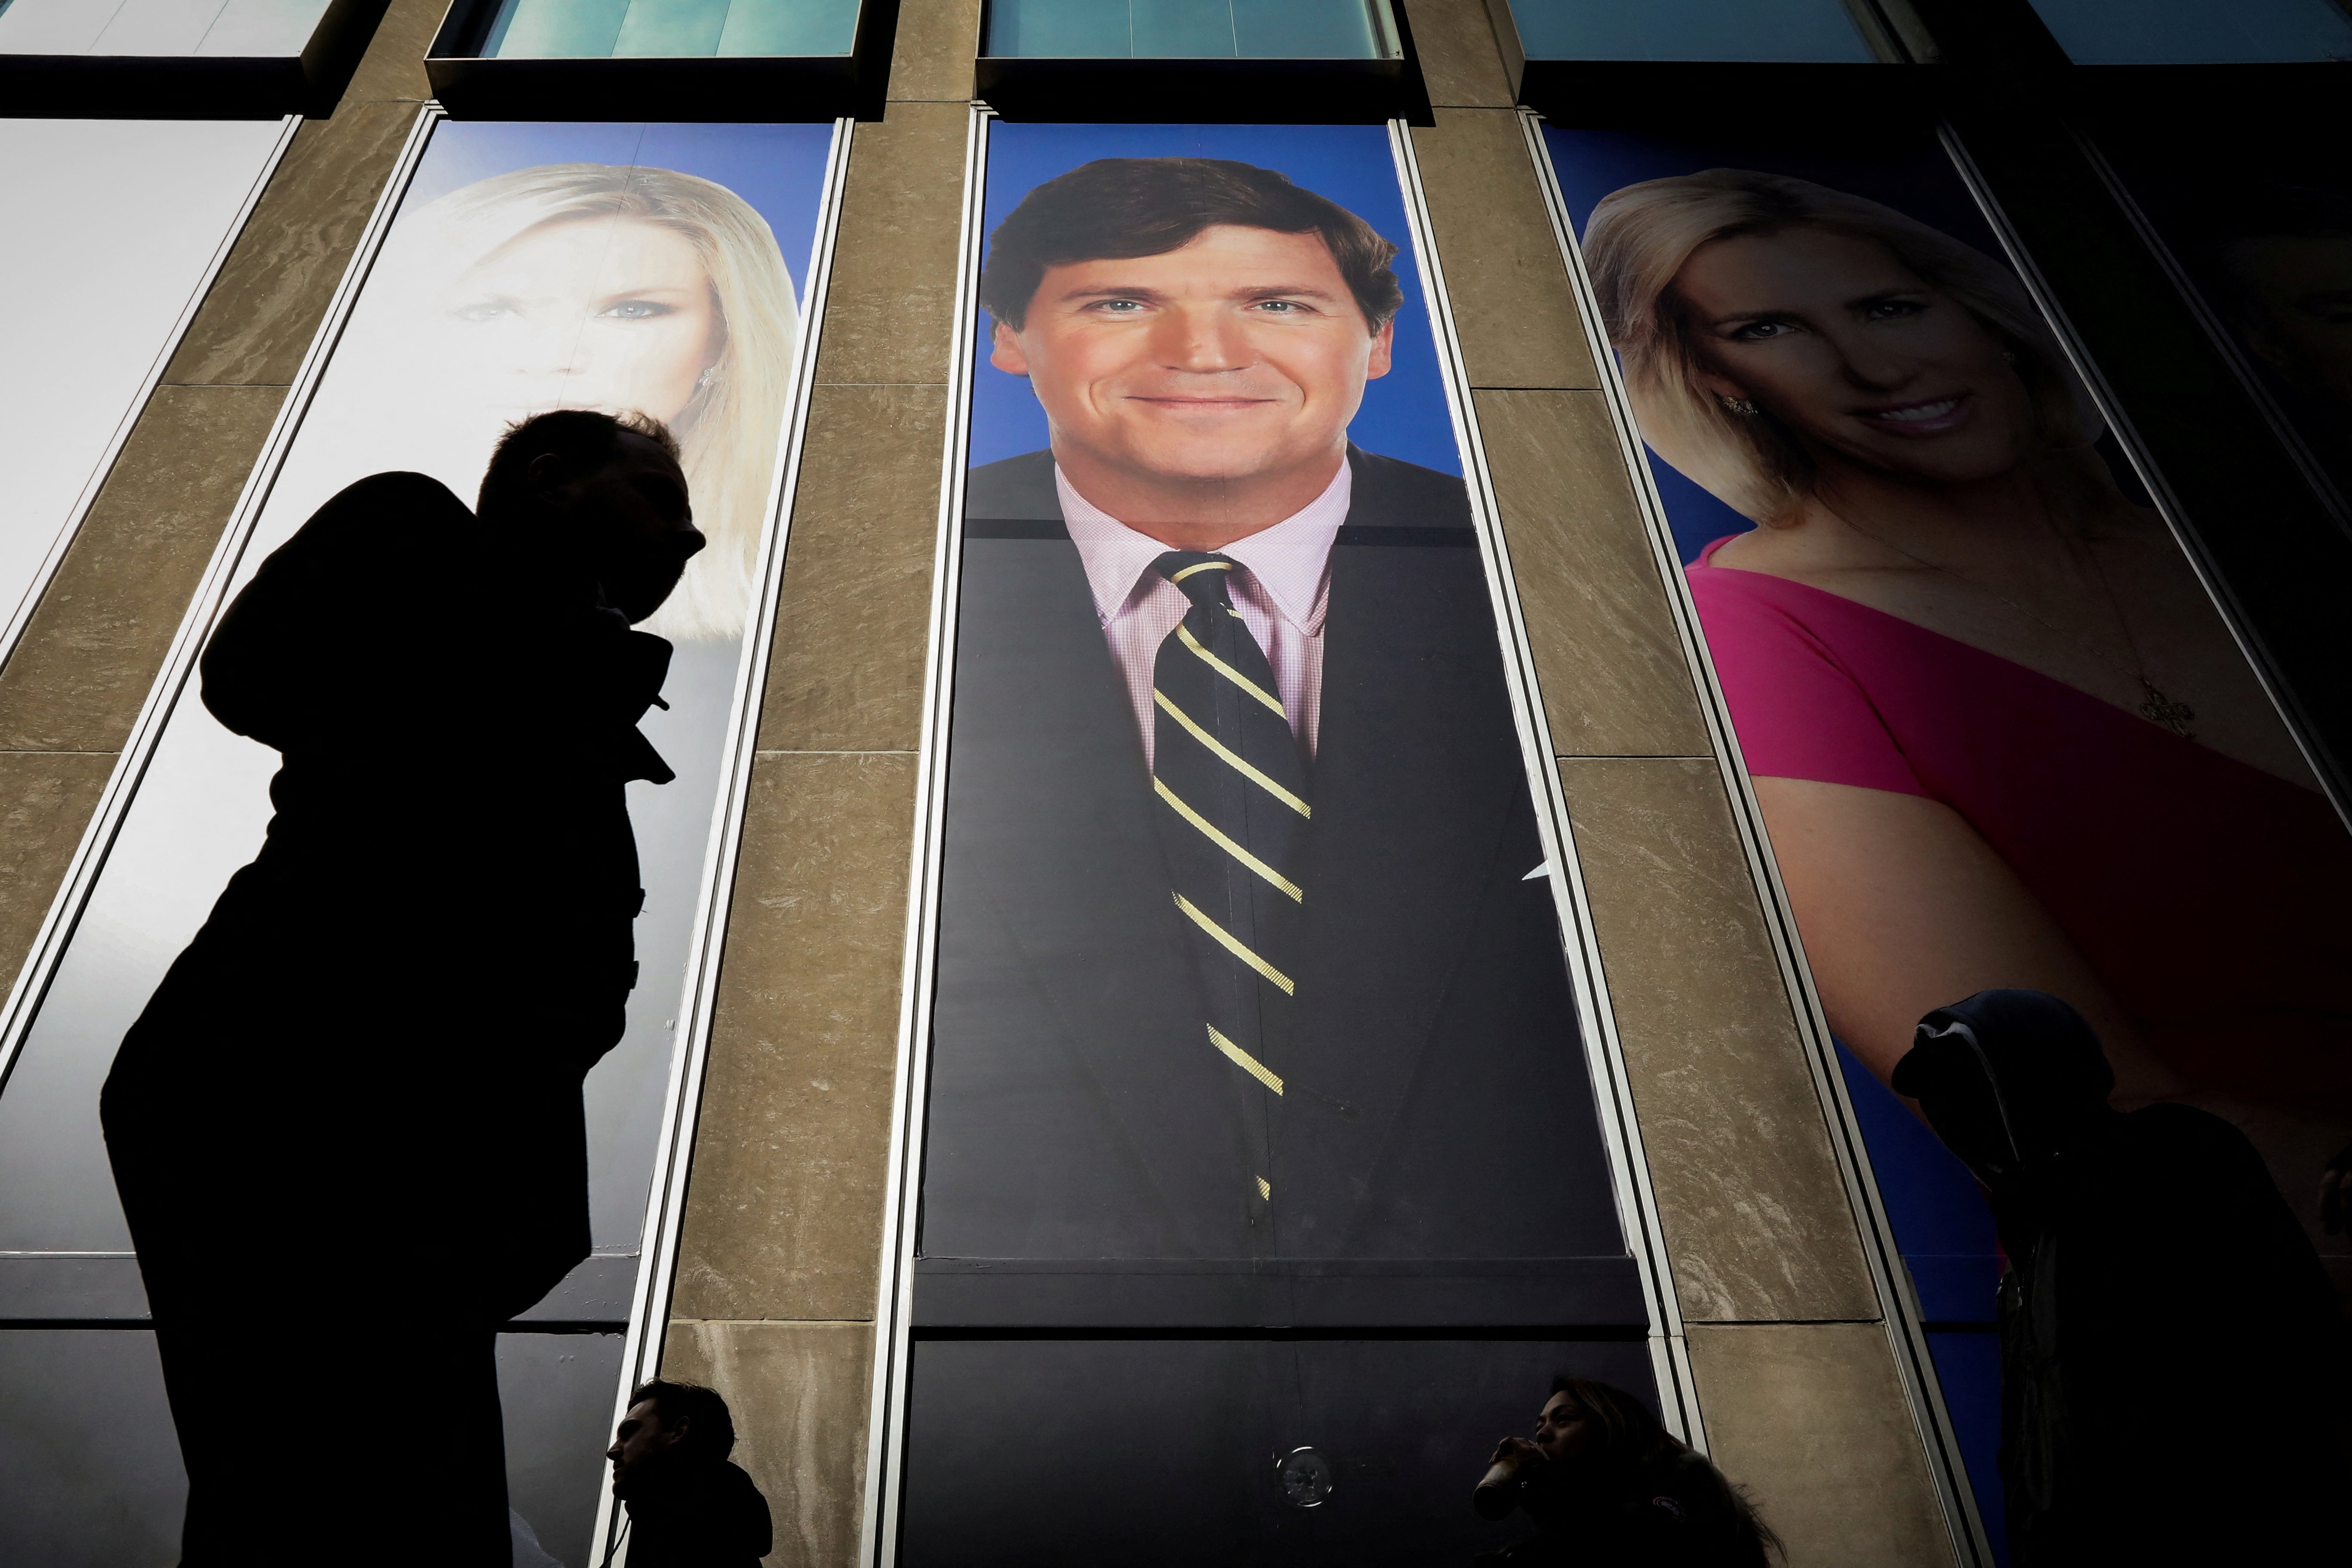 A promo photo of Fox News host Tucker Carlson on the News Corp building in New York. The primetime anchor ‘parted’ with the network on Monday